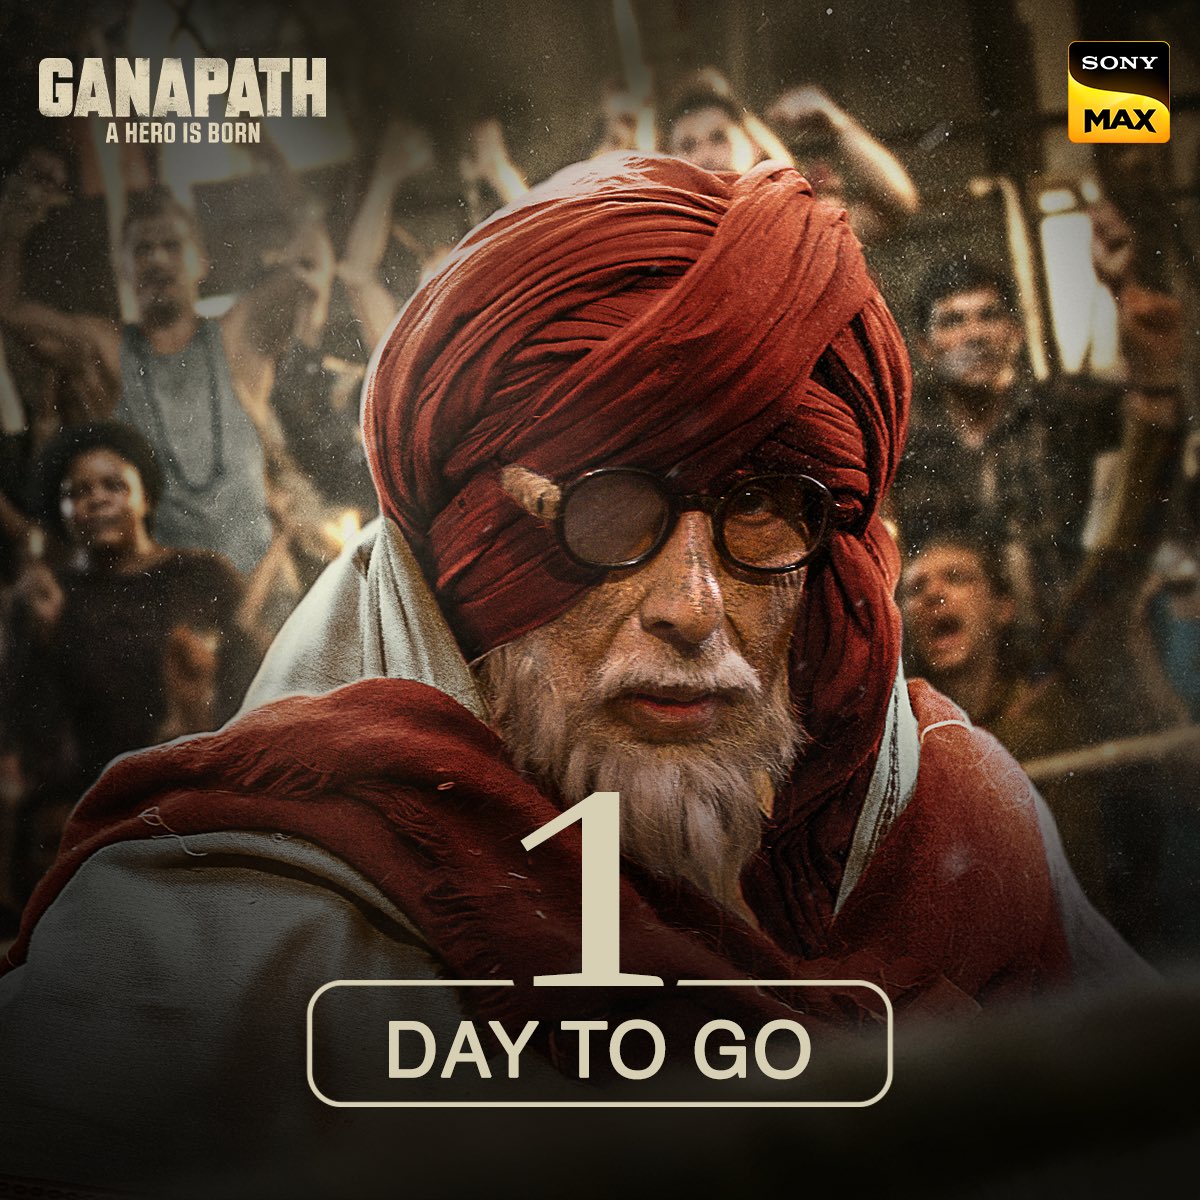 Ganapath will be arriving on your screens tomorrow! Watch the World Television Premiere of Ganapath, on 26th May, Sunday 12 PM only on SONY MAX. #SonyMAX #DeewanaBanaDe #Ganapath #WorldTVPremiere